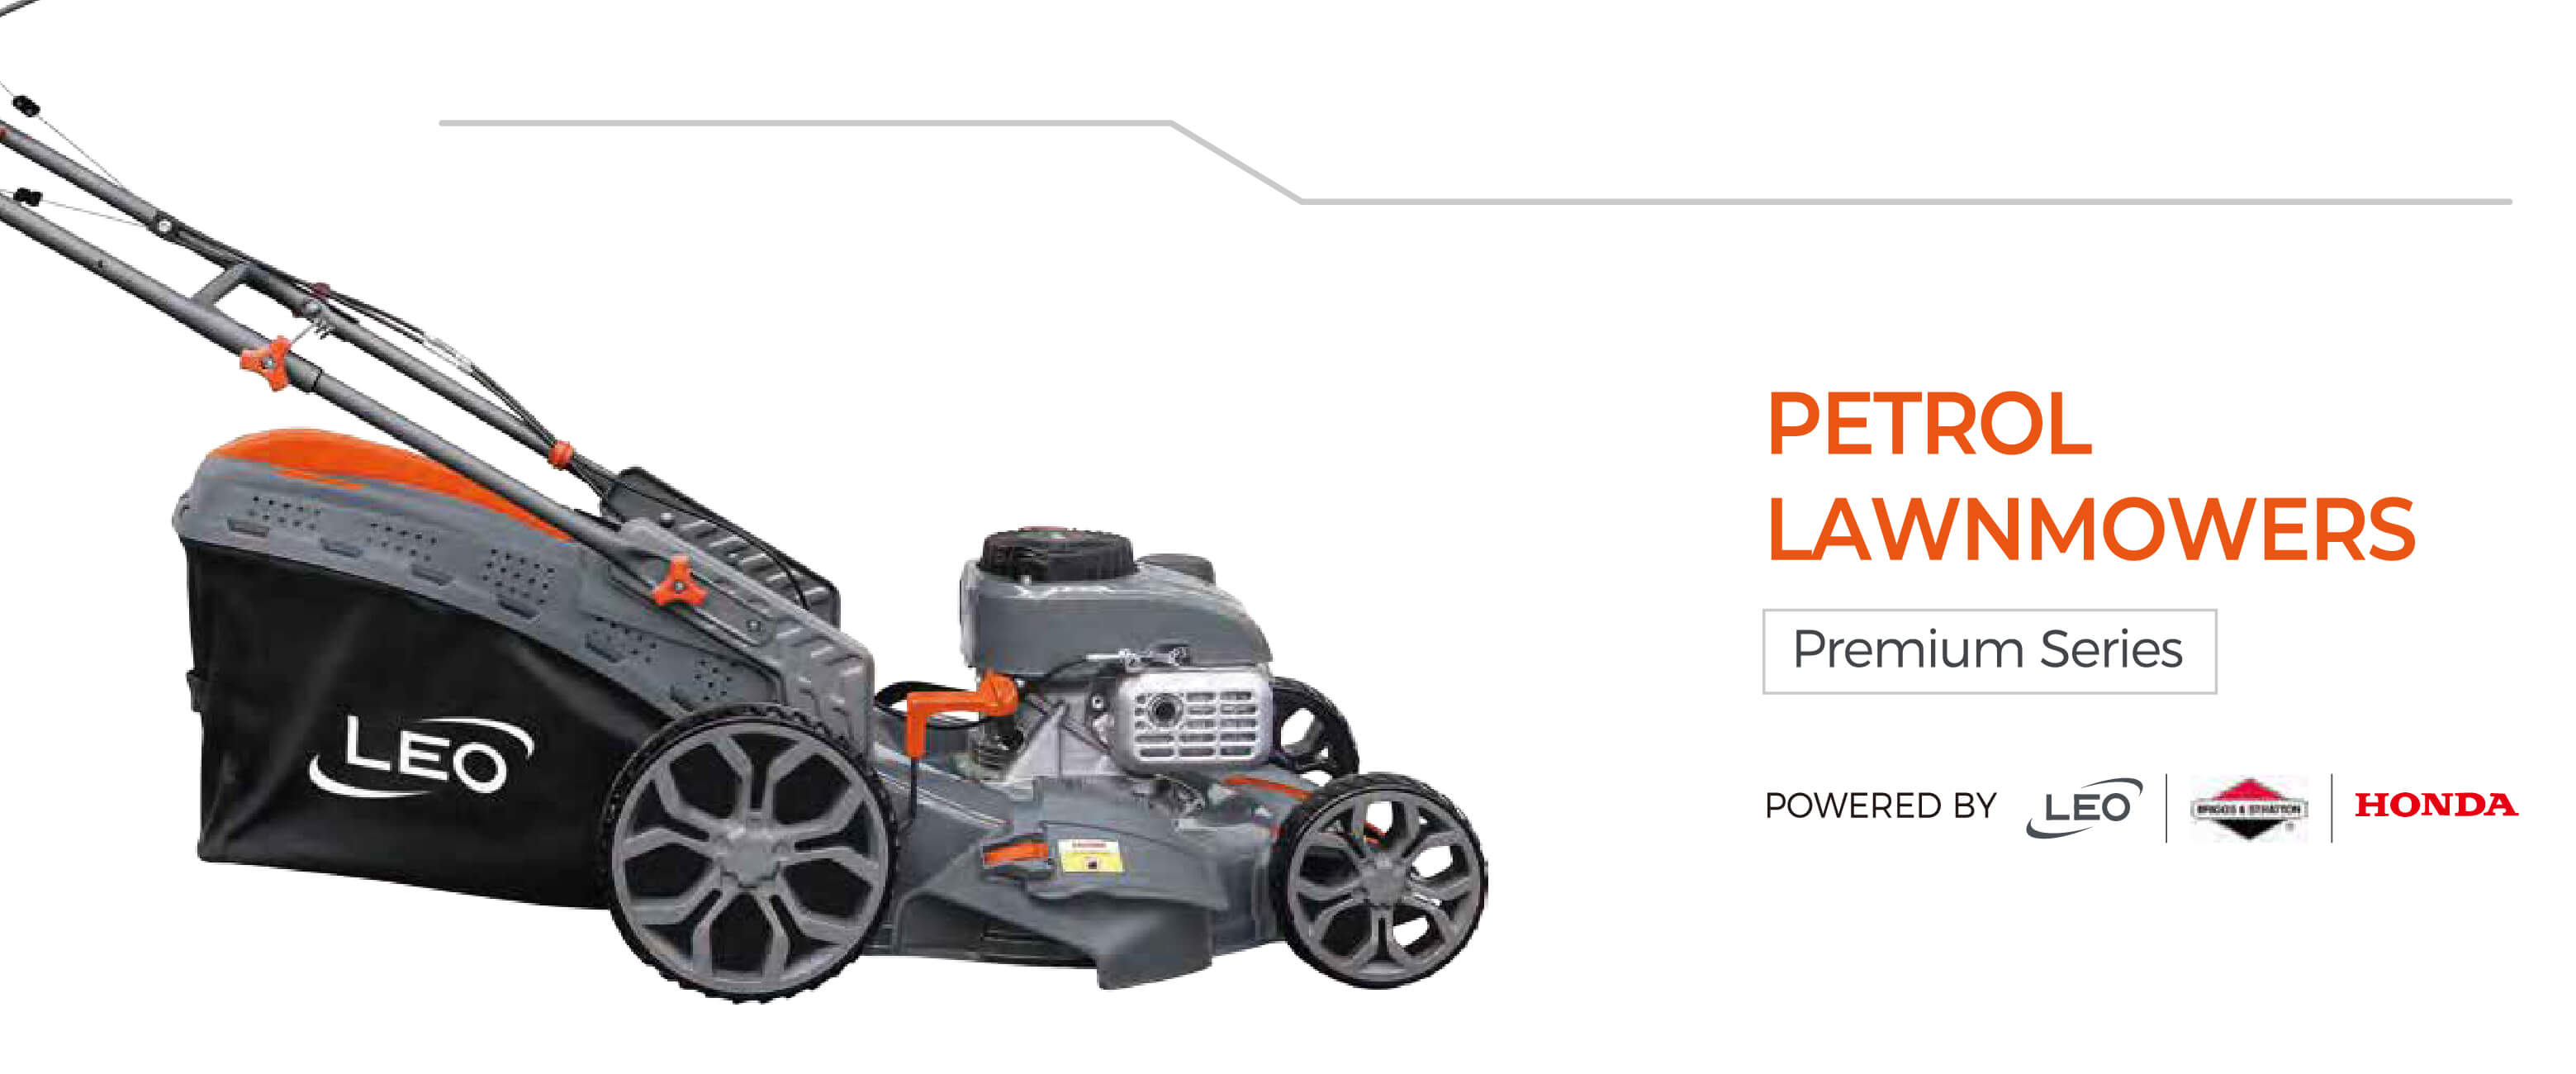 LM-2L Petrol Lawnmowers Features